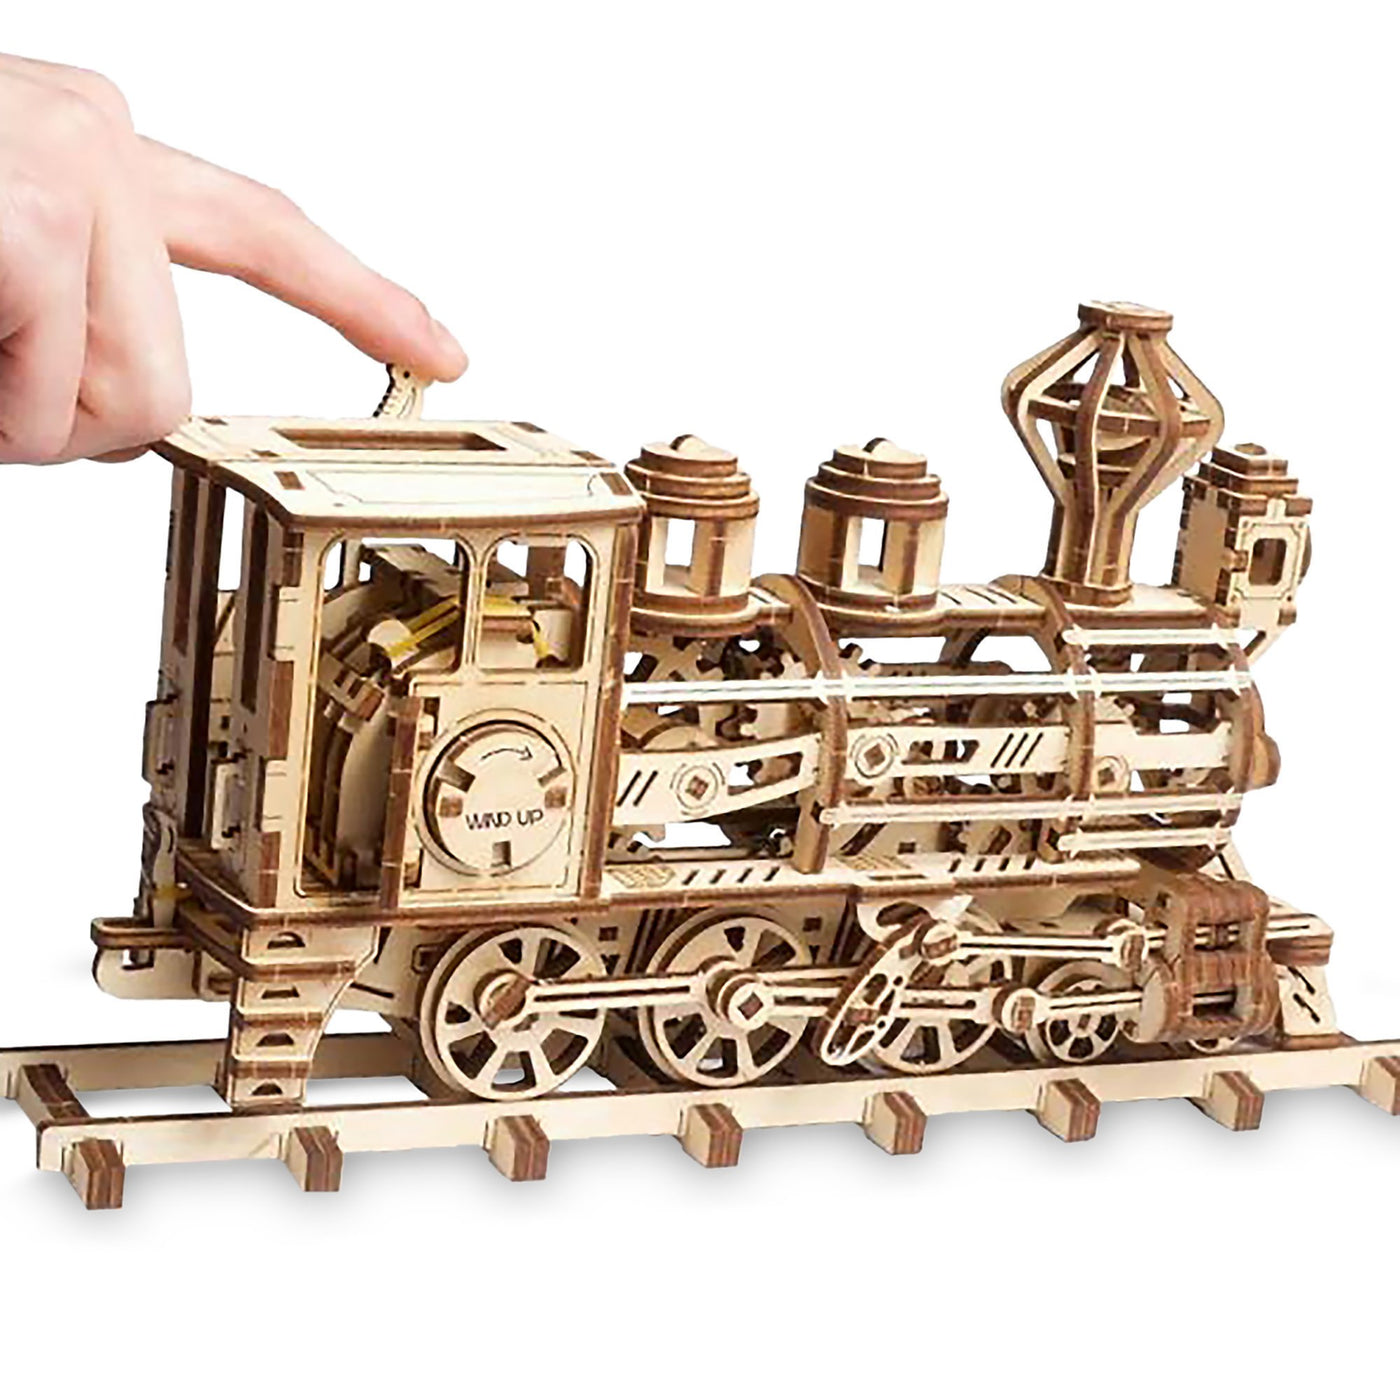 Disney Parks Walter E. Train Wooden Puzzle Working Mechanical Model New Box